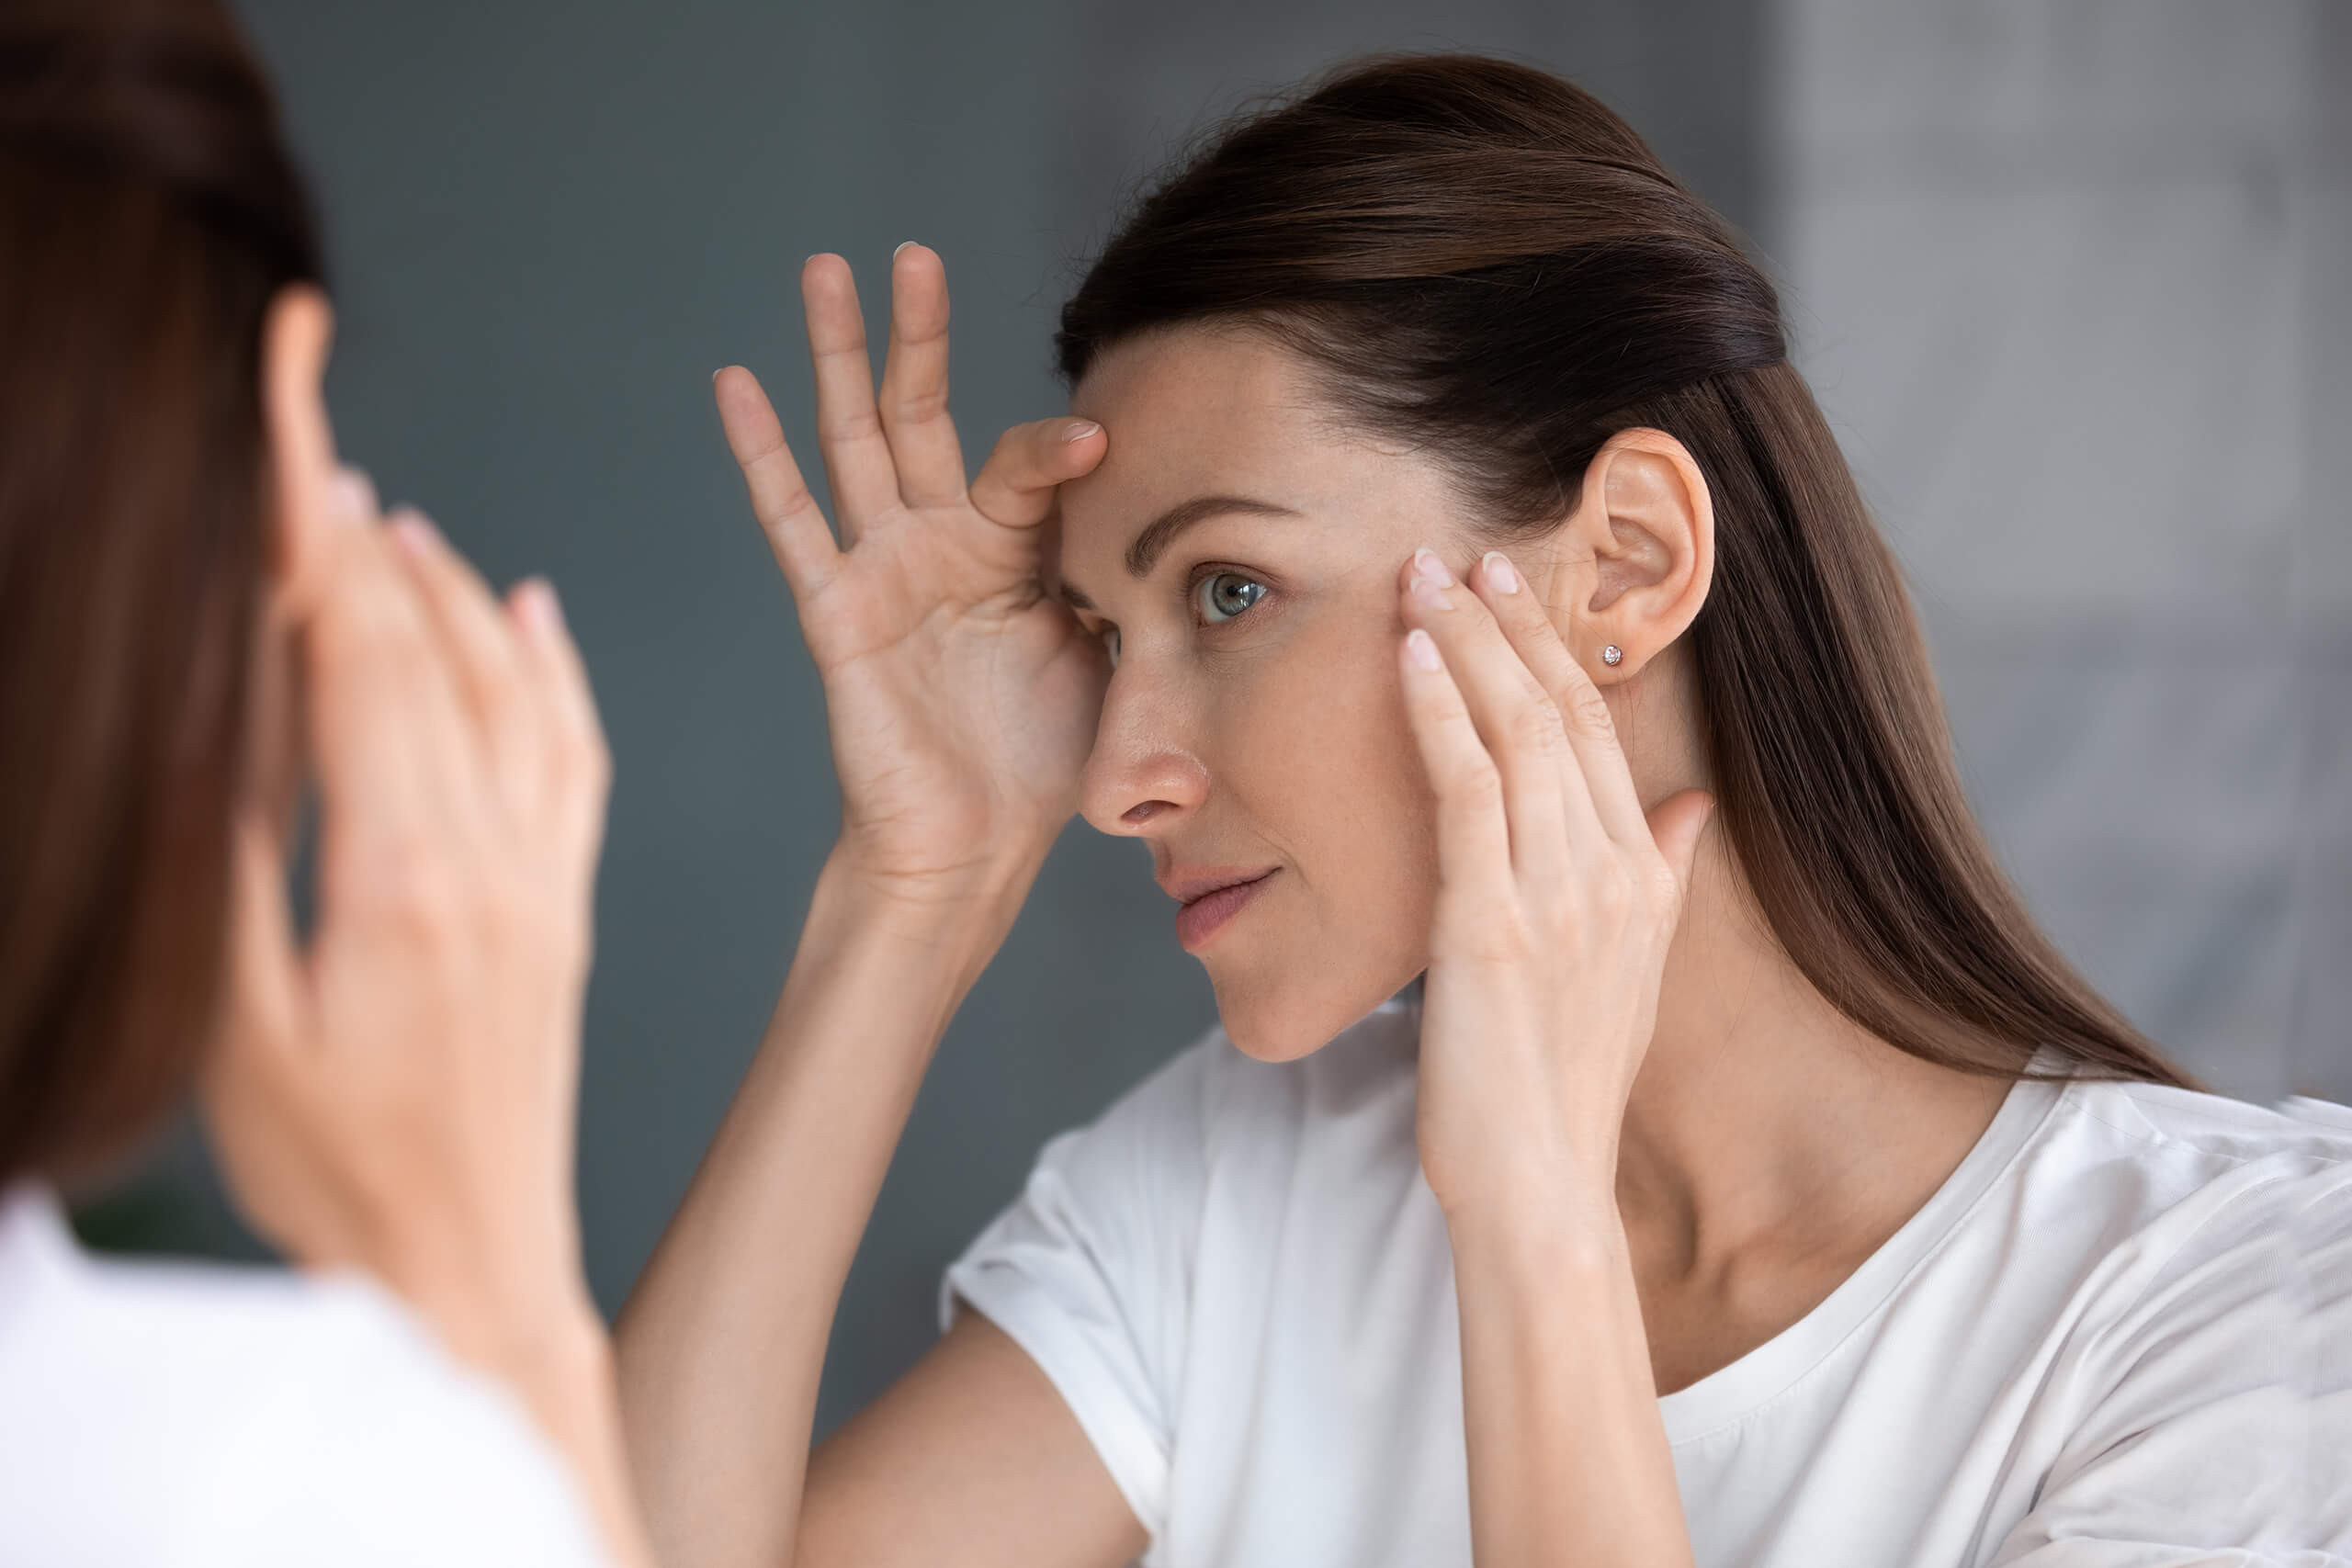 A woman inspects her face in a mirror as she considers a facelift.